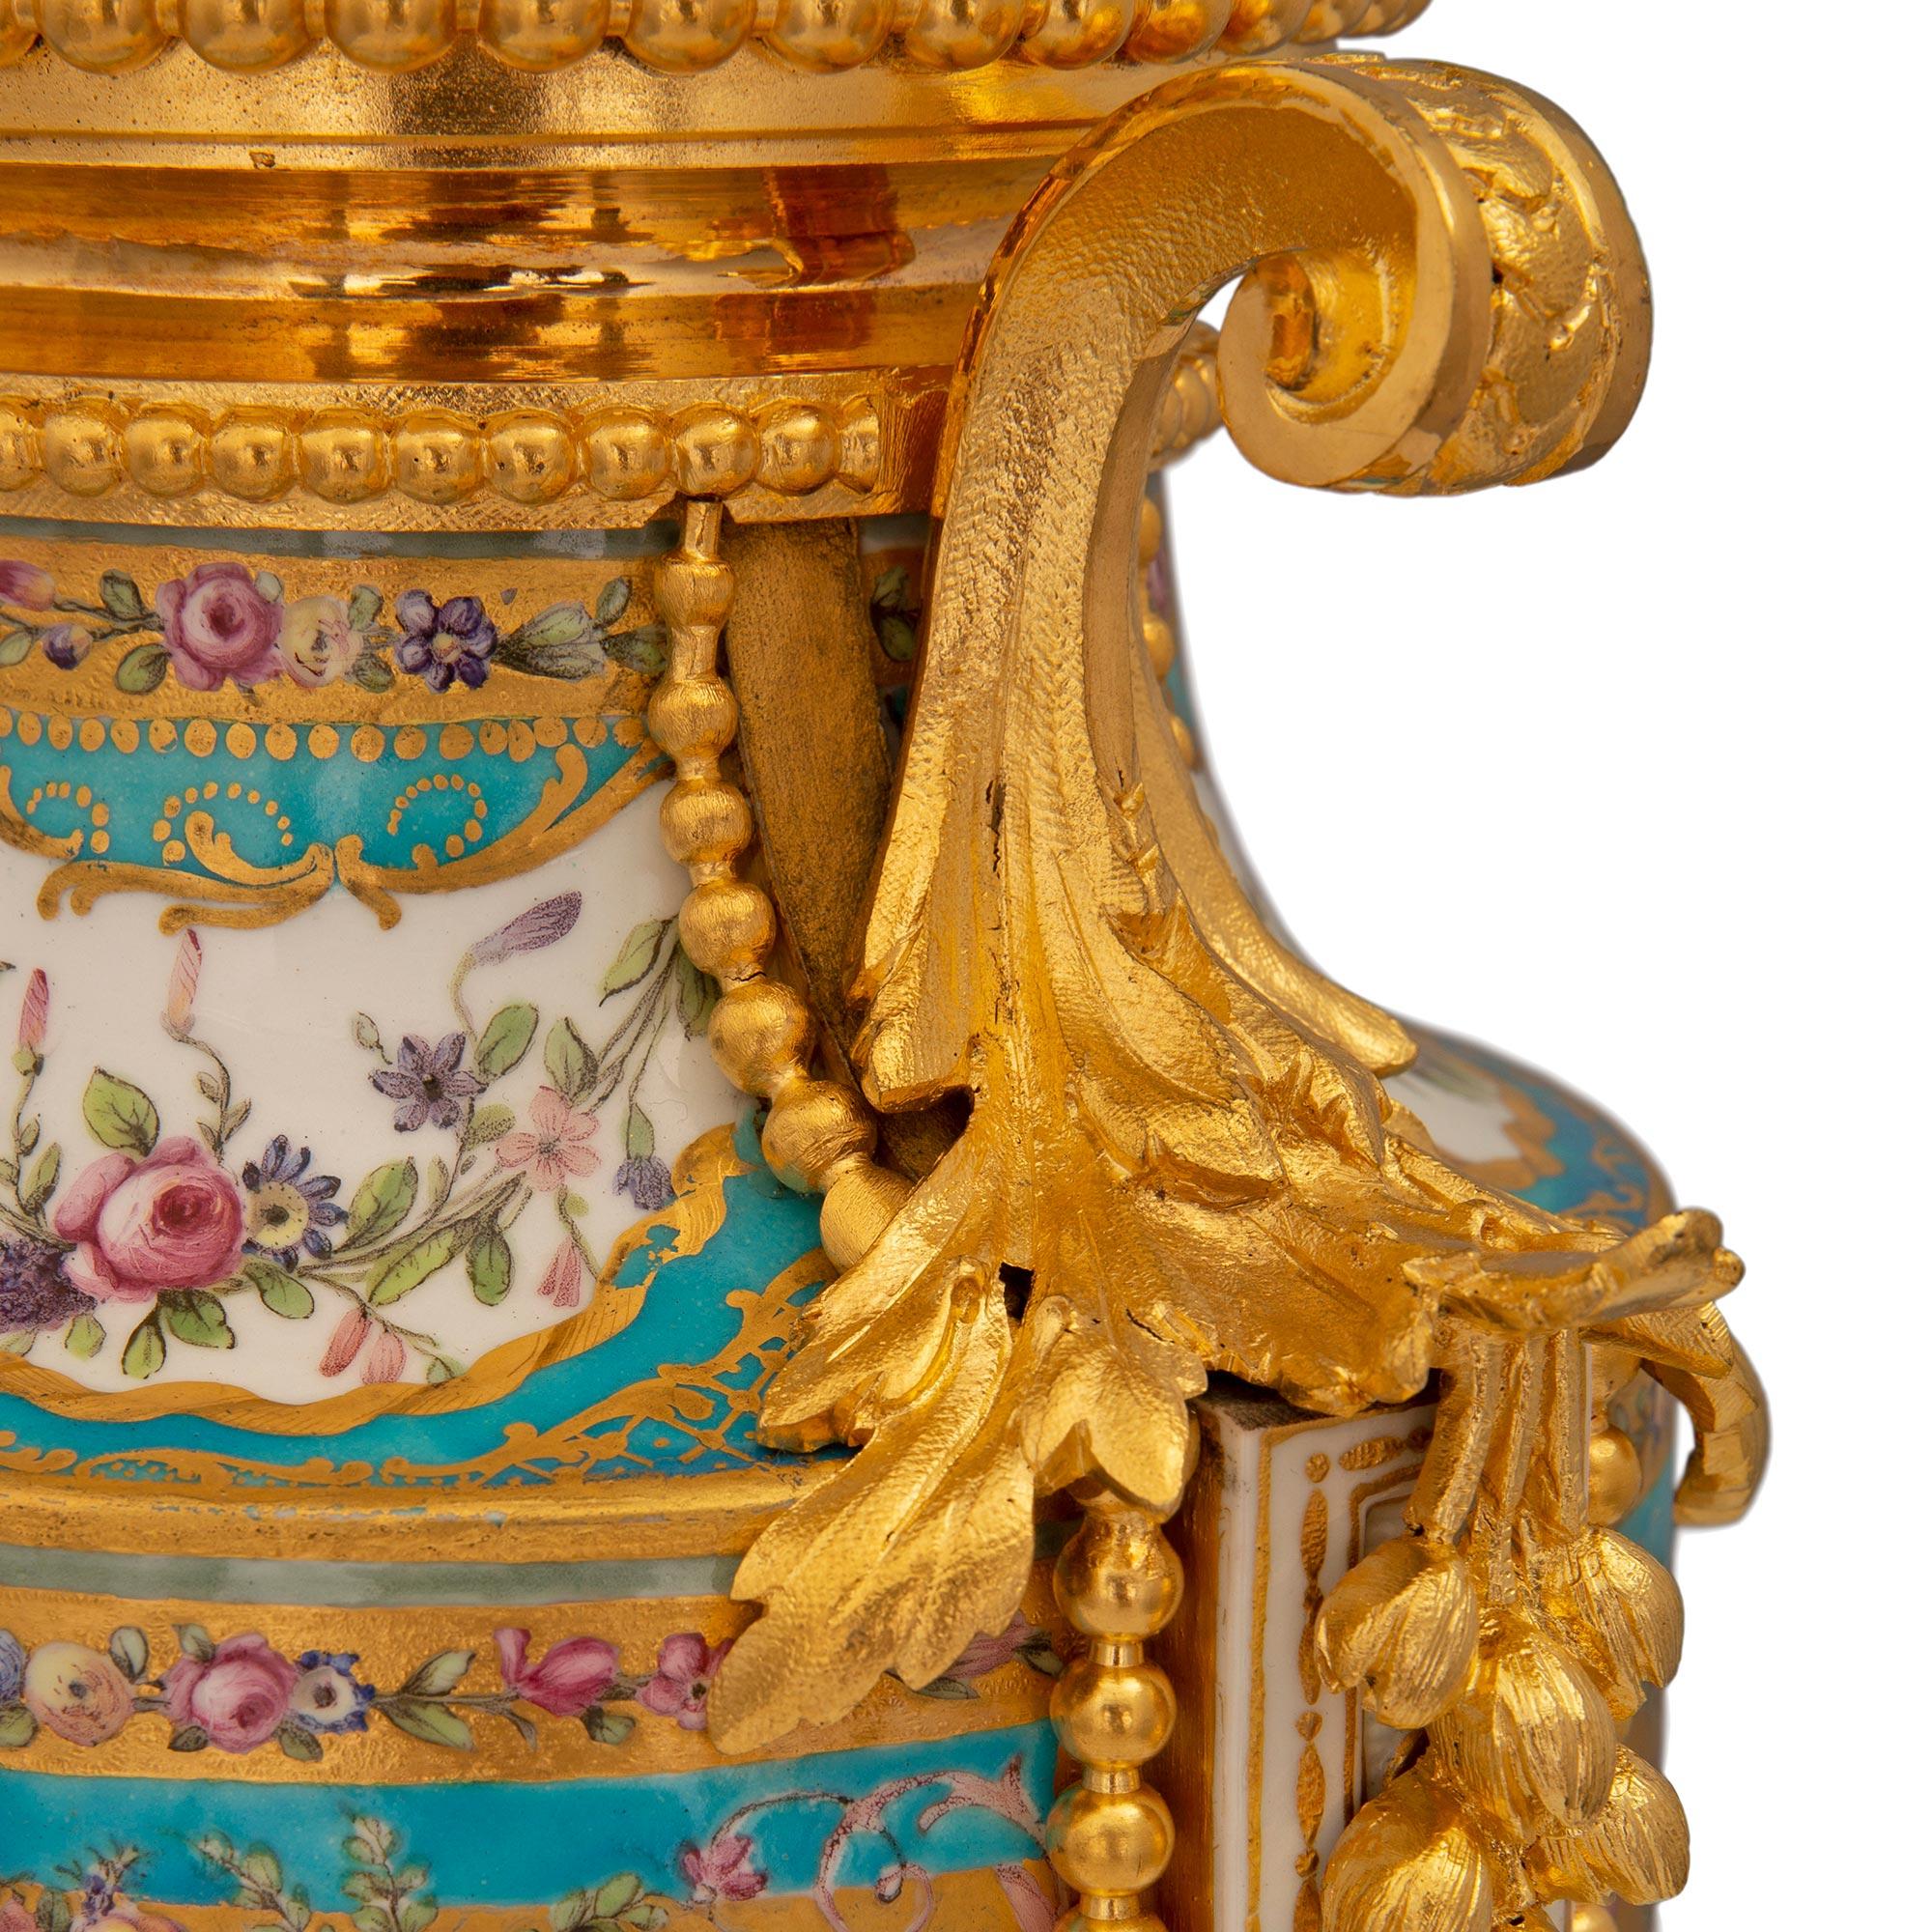 Pair of French 19th Century Louis XVI St. Sèvres Porcelain & Ormolu Lidded Urns For Sale 4